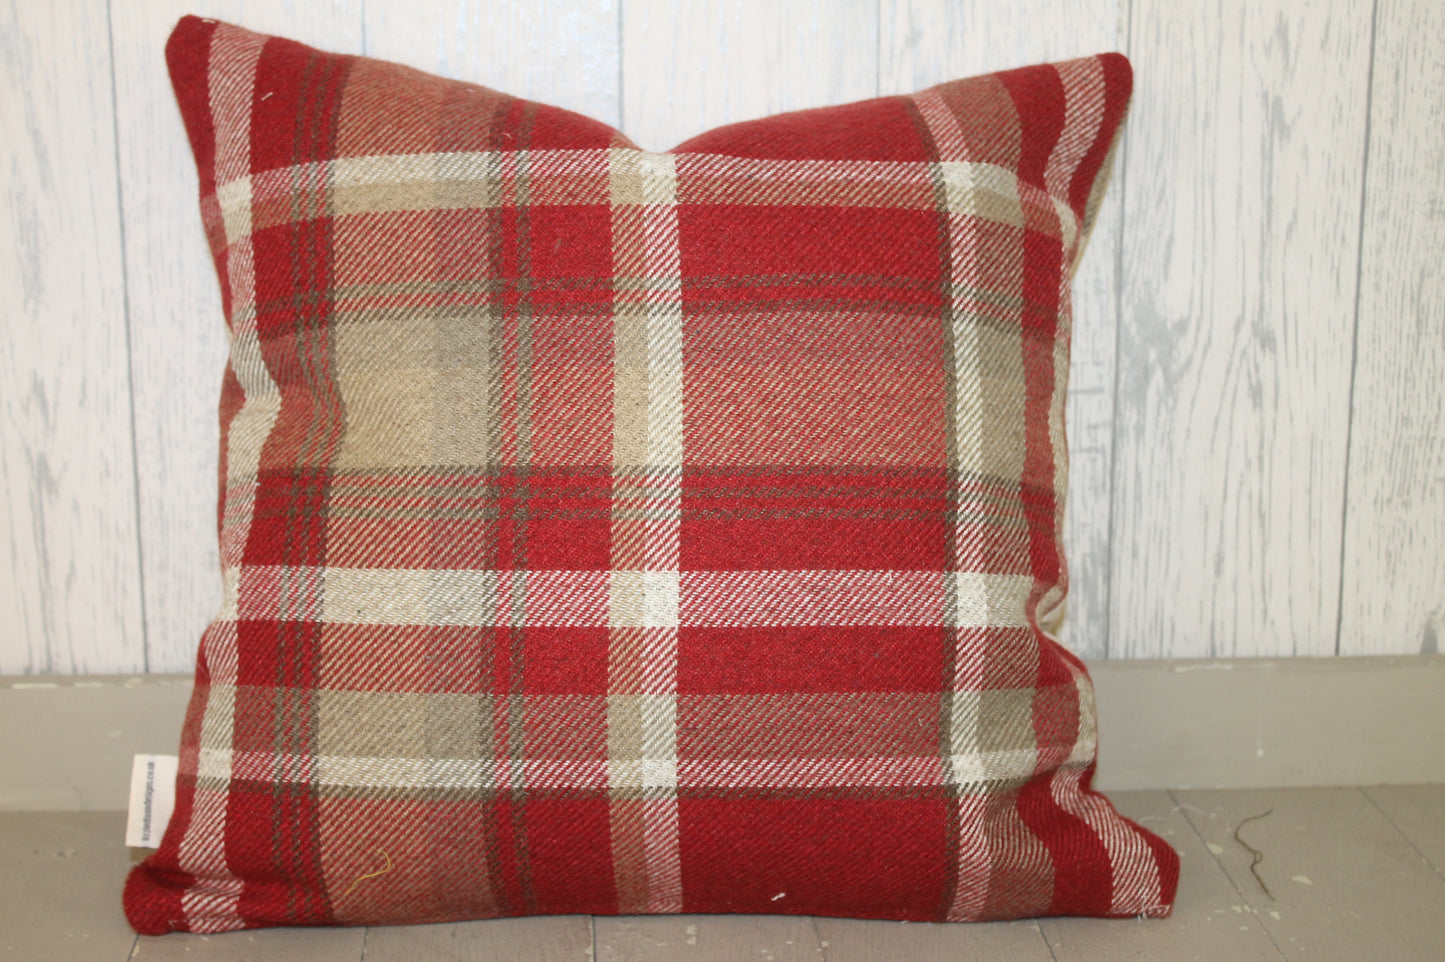 Cwtches and cuddles welsh quotes-16" wool touch fabric panel cushion-Choice of 4 Colours